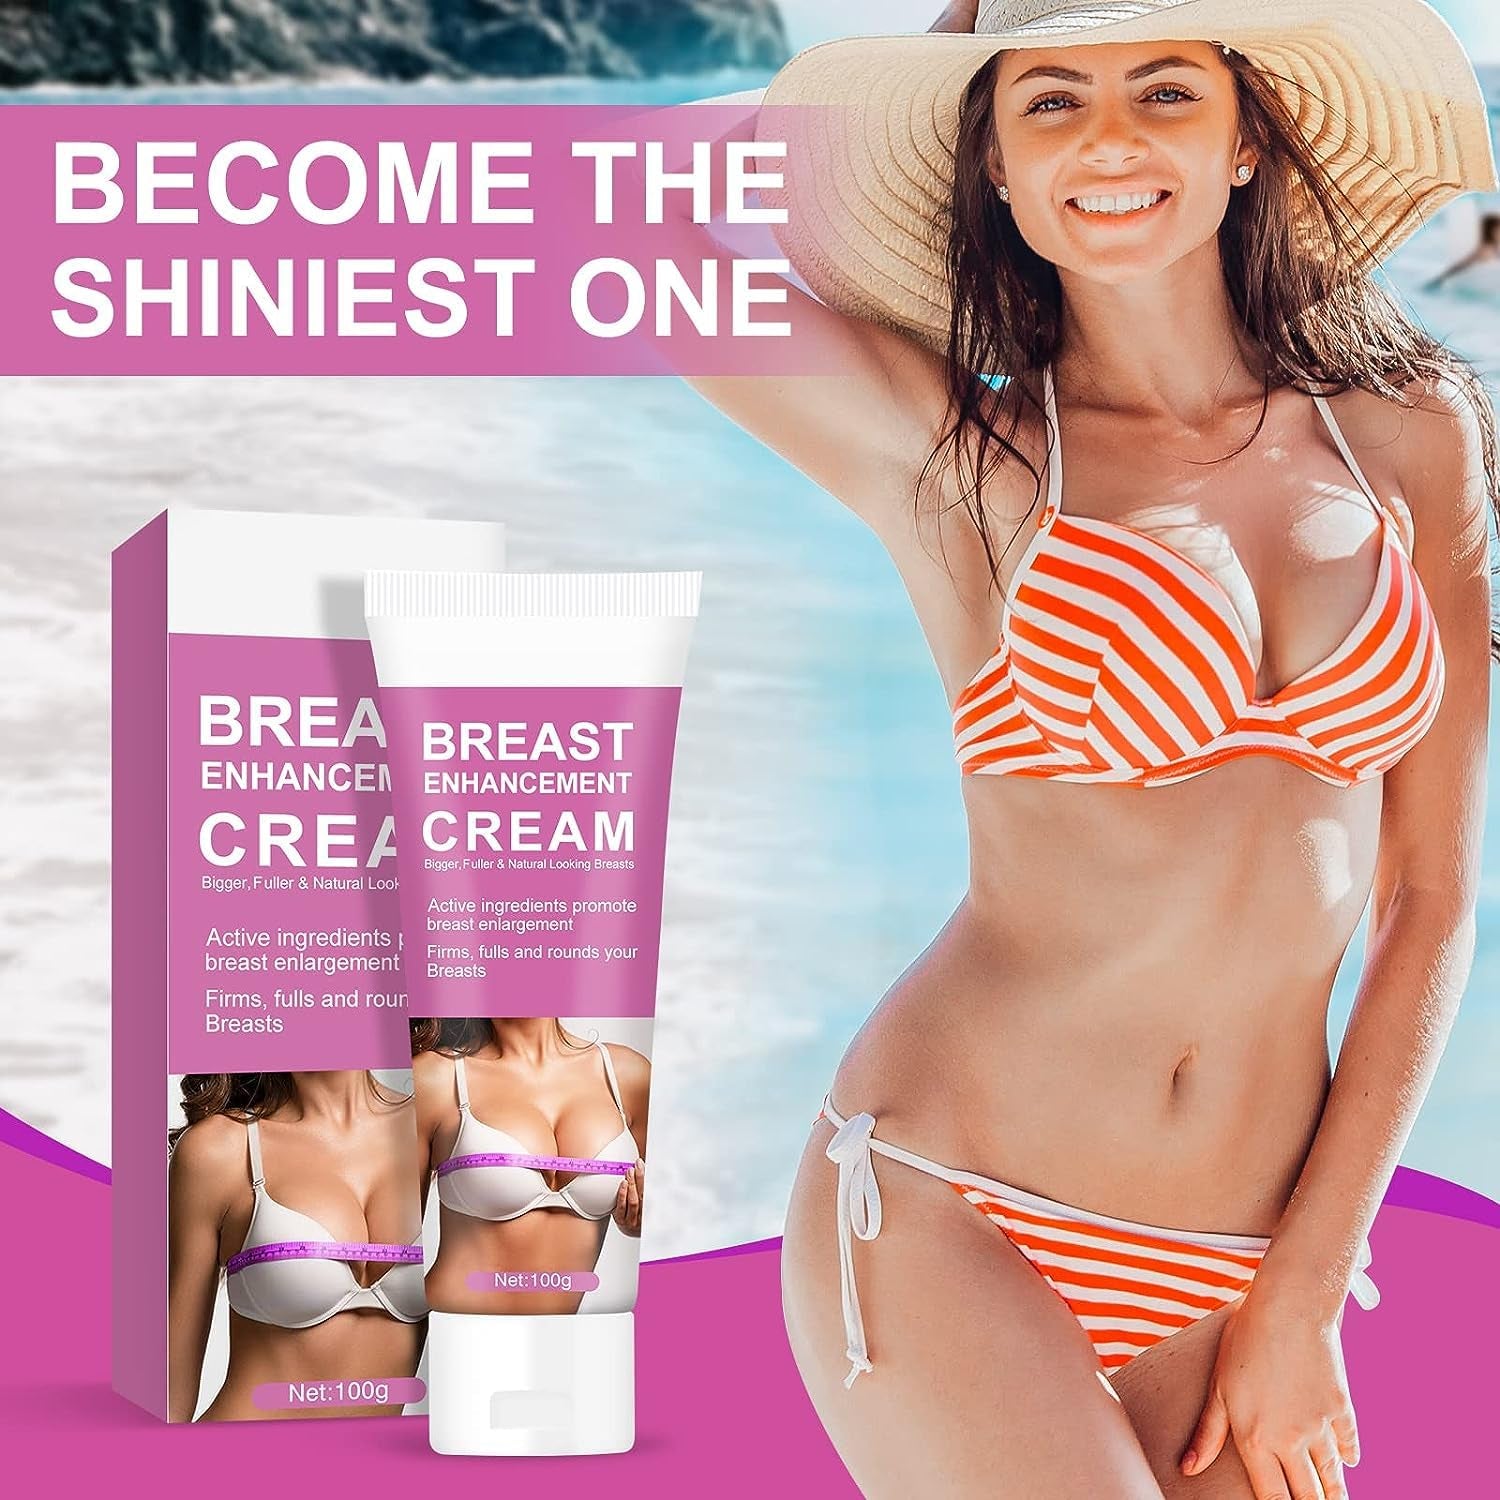 Breast Enhancement Cream, Breast Enlargement Cream Fast Growth, Firming and Lifting Cream, Plumps and Lifts Your Breasts and Improves Sagging Breasts